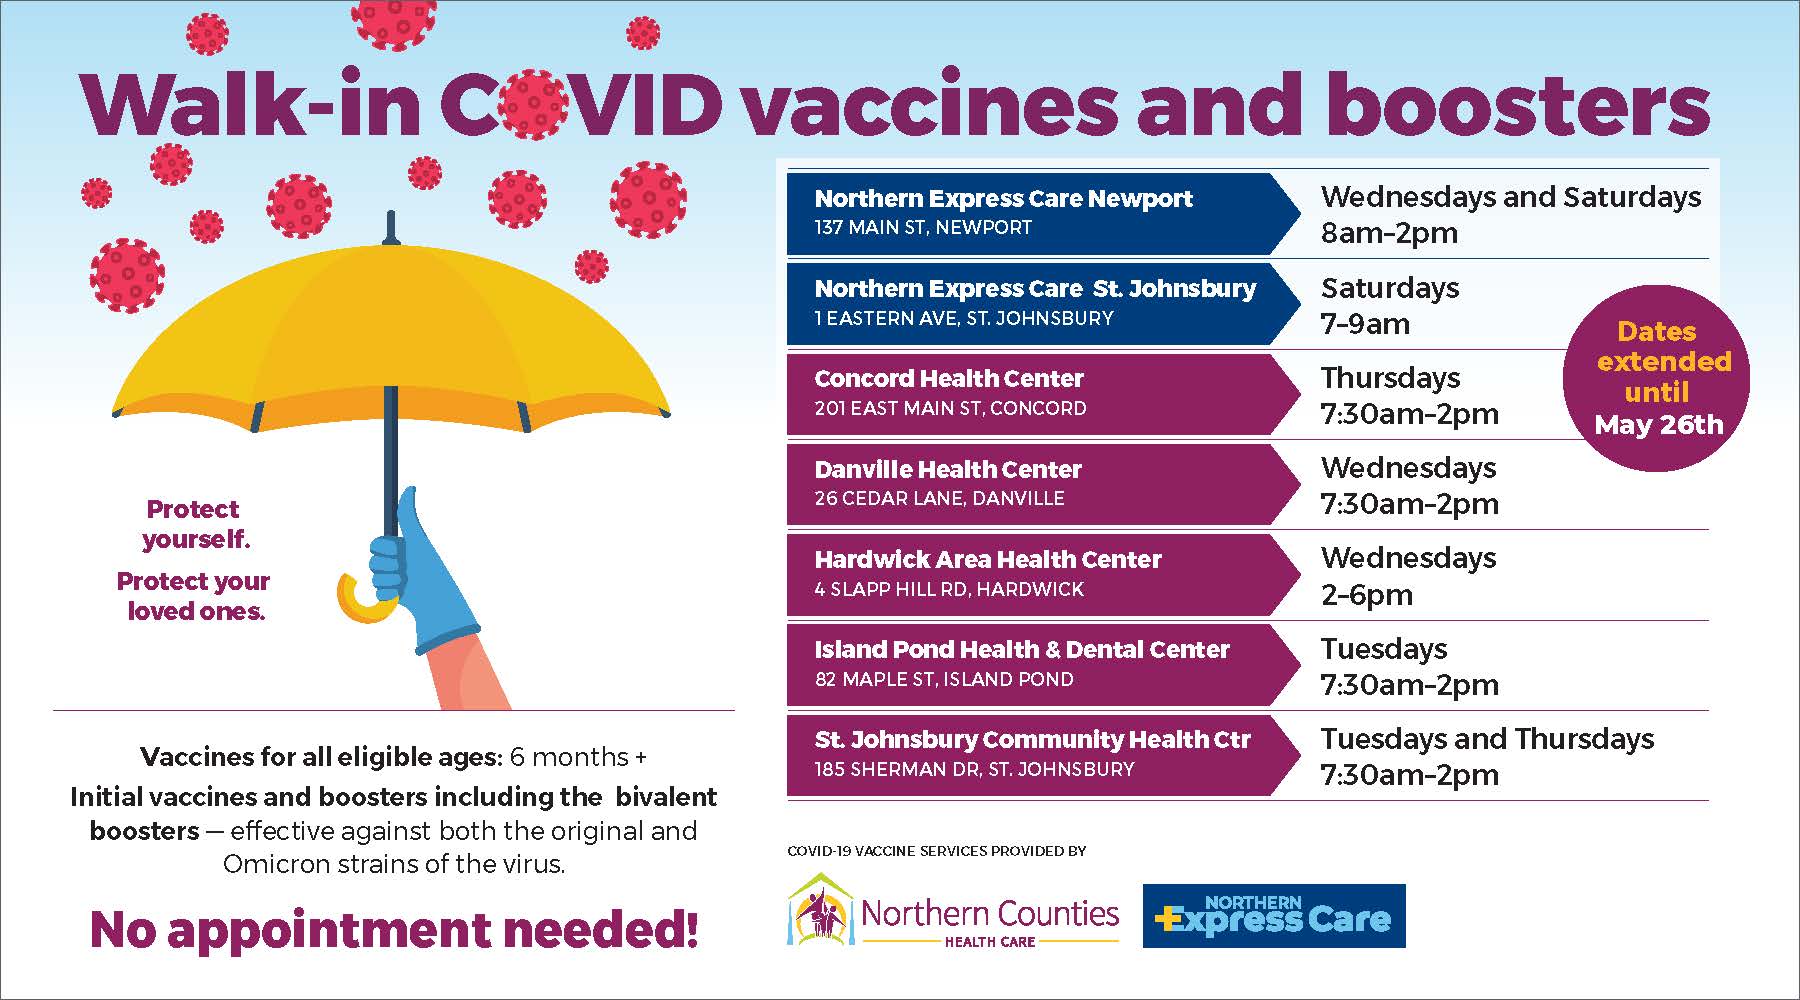 Graphic image with details on the Walk-in COVID vaccines and booster clinics.